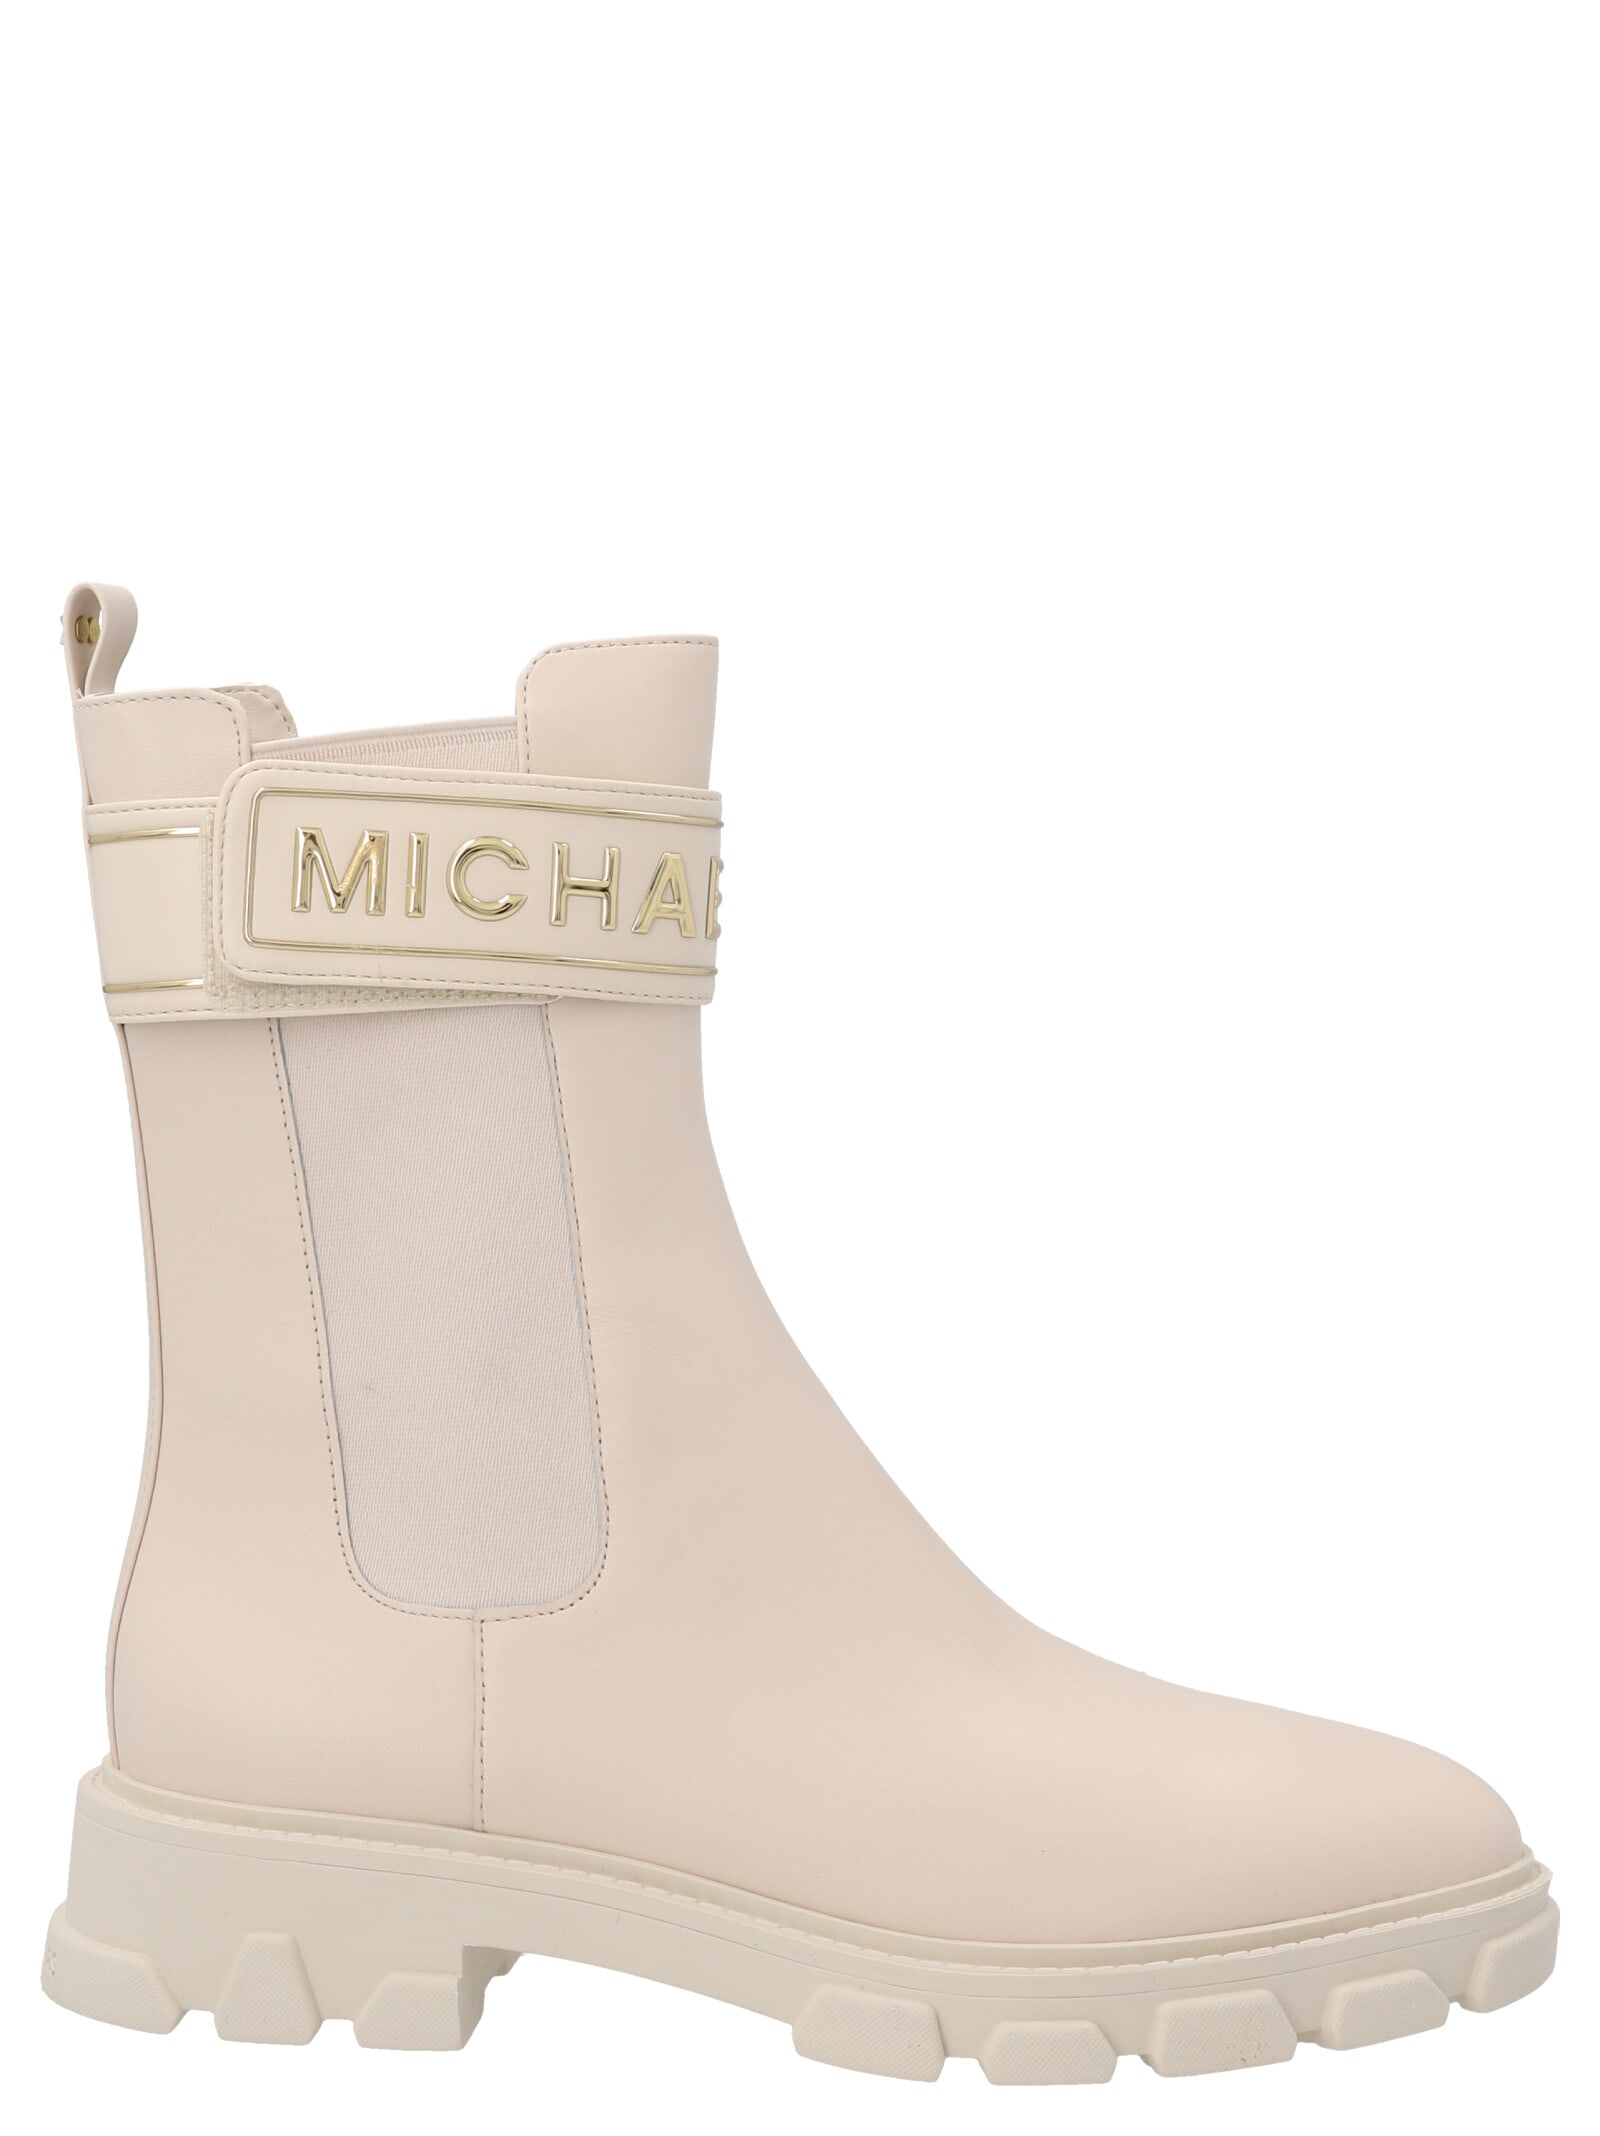 Michael Kors ridley Ankle Boots